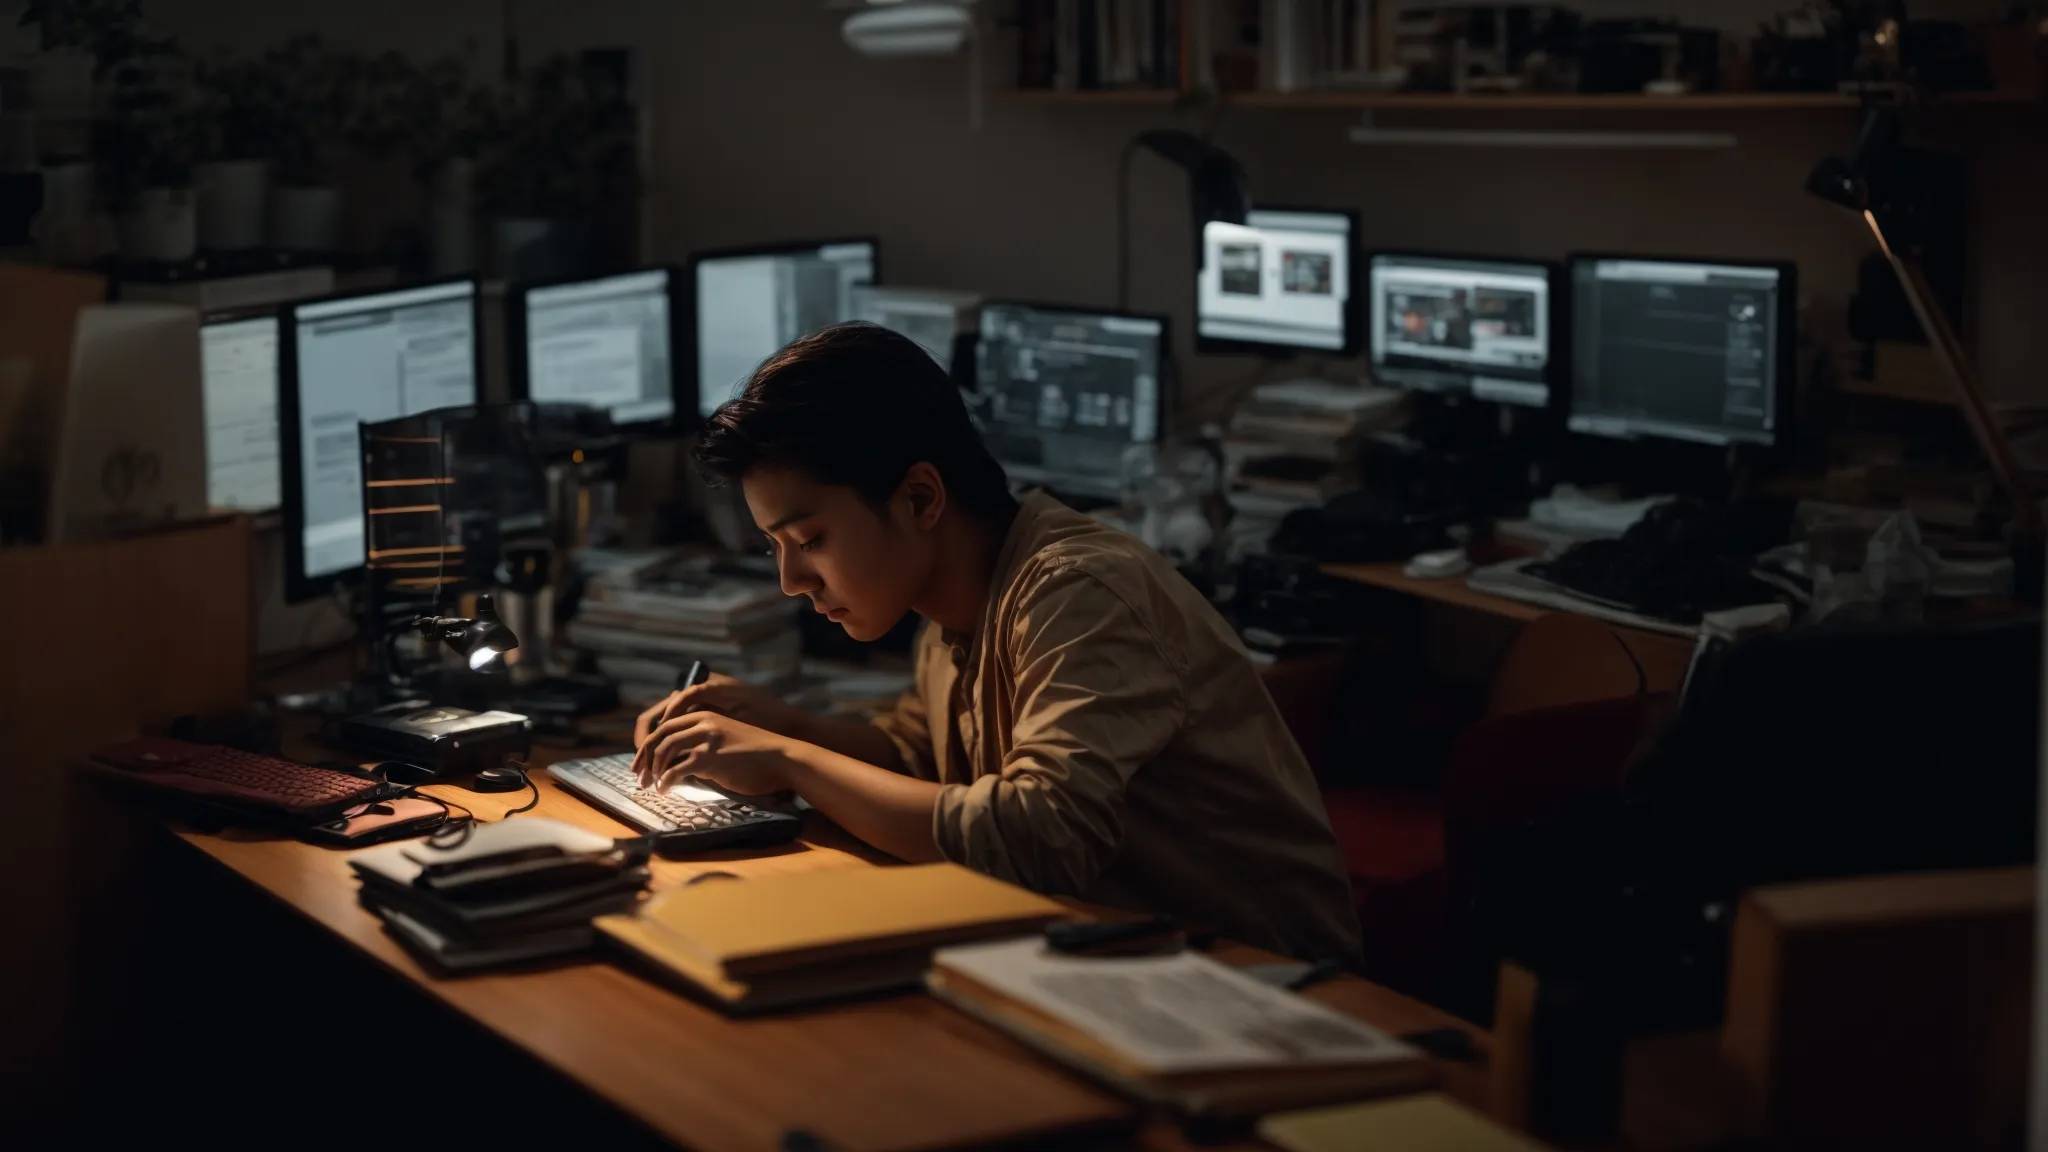 a person sitting at a cluttered desk, illuminated by the soft glow of a computer screen as they type intently.